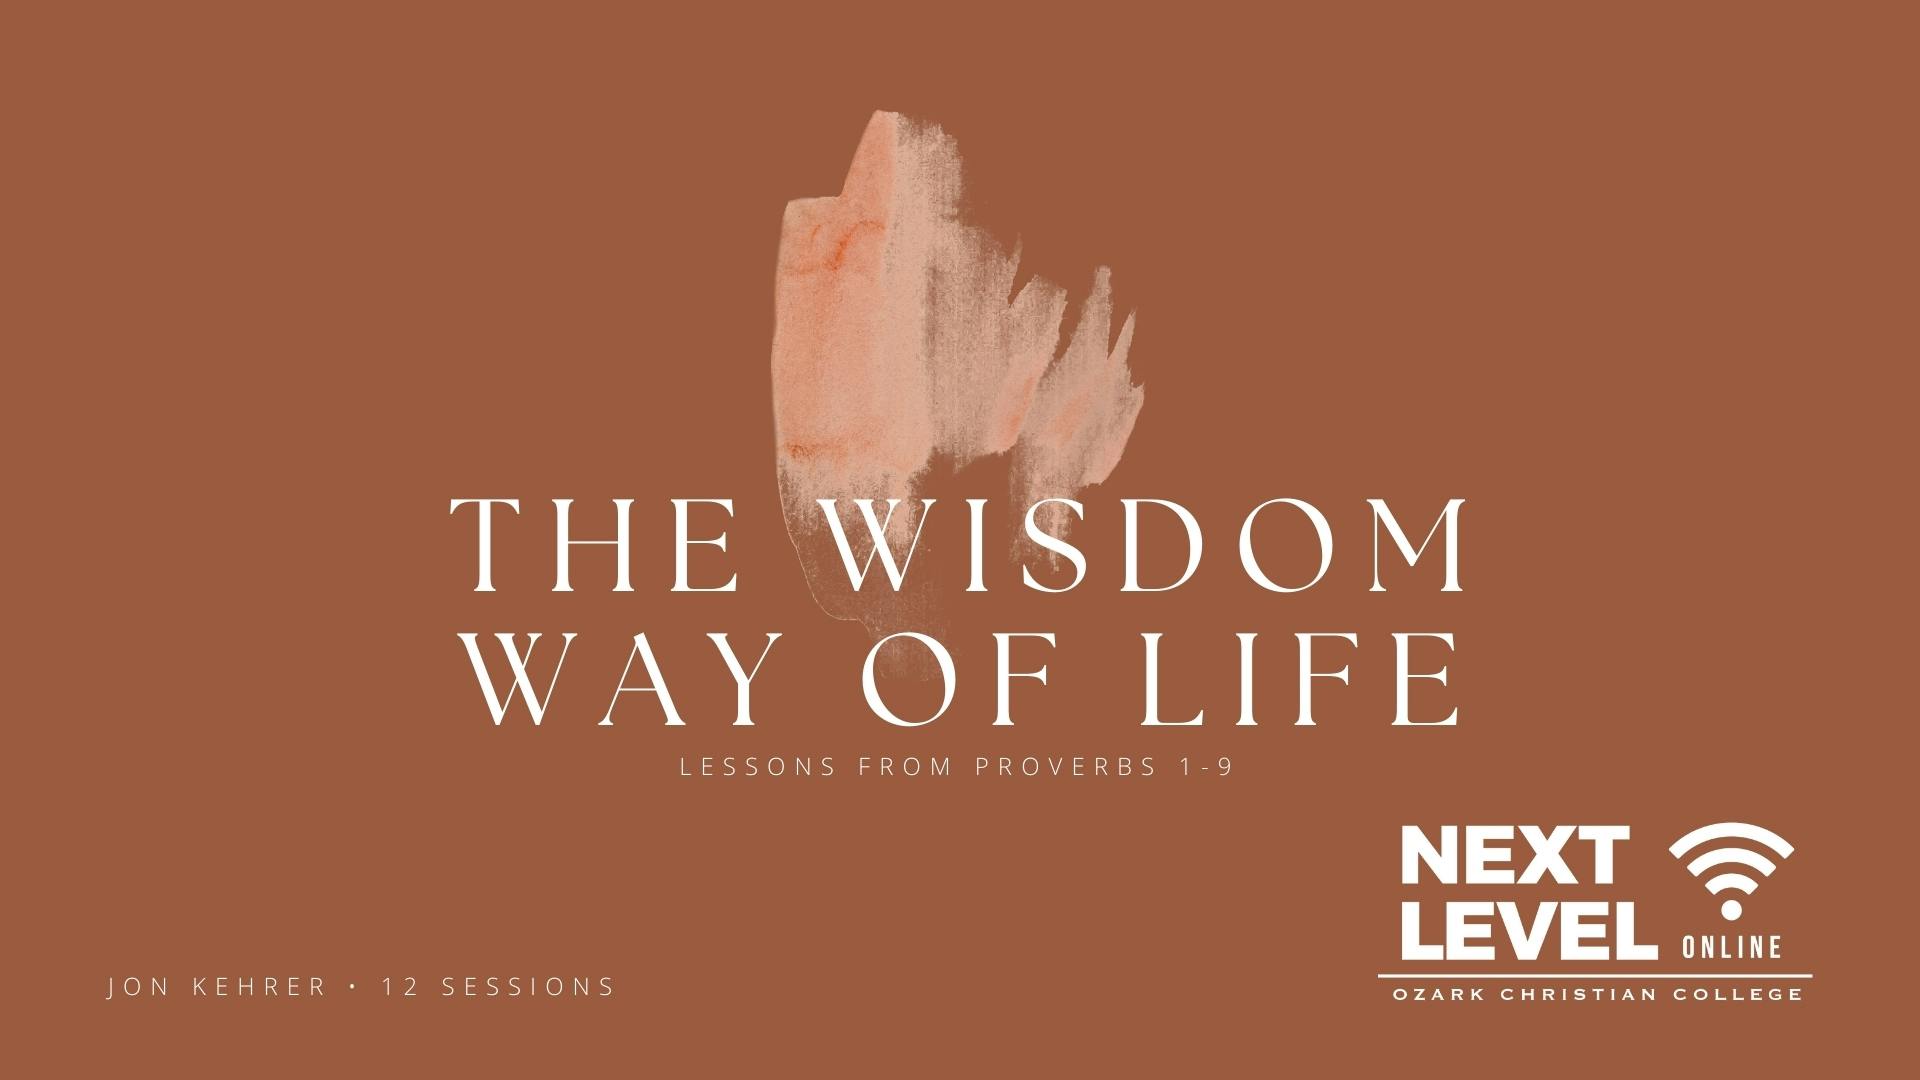 The Wisdom Way of Life: Lessons from Proverbs 1-9